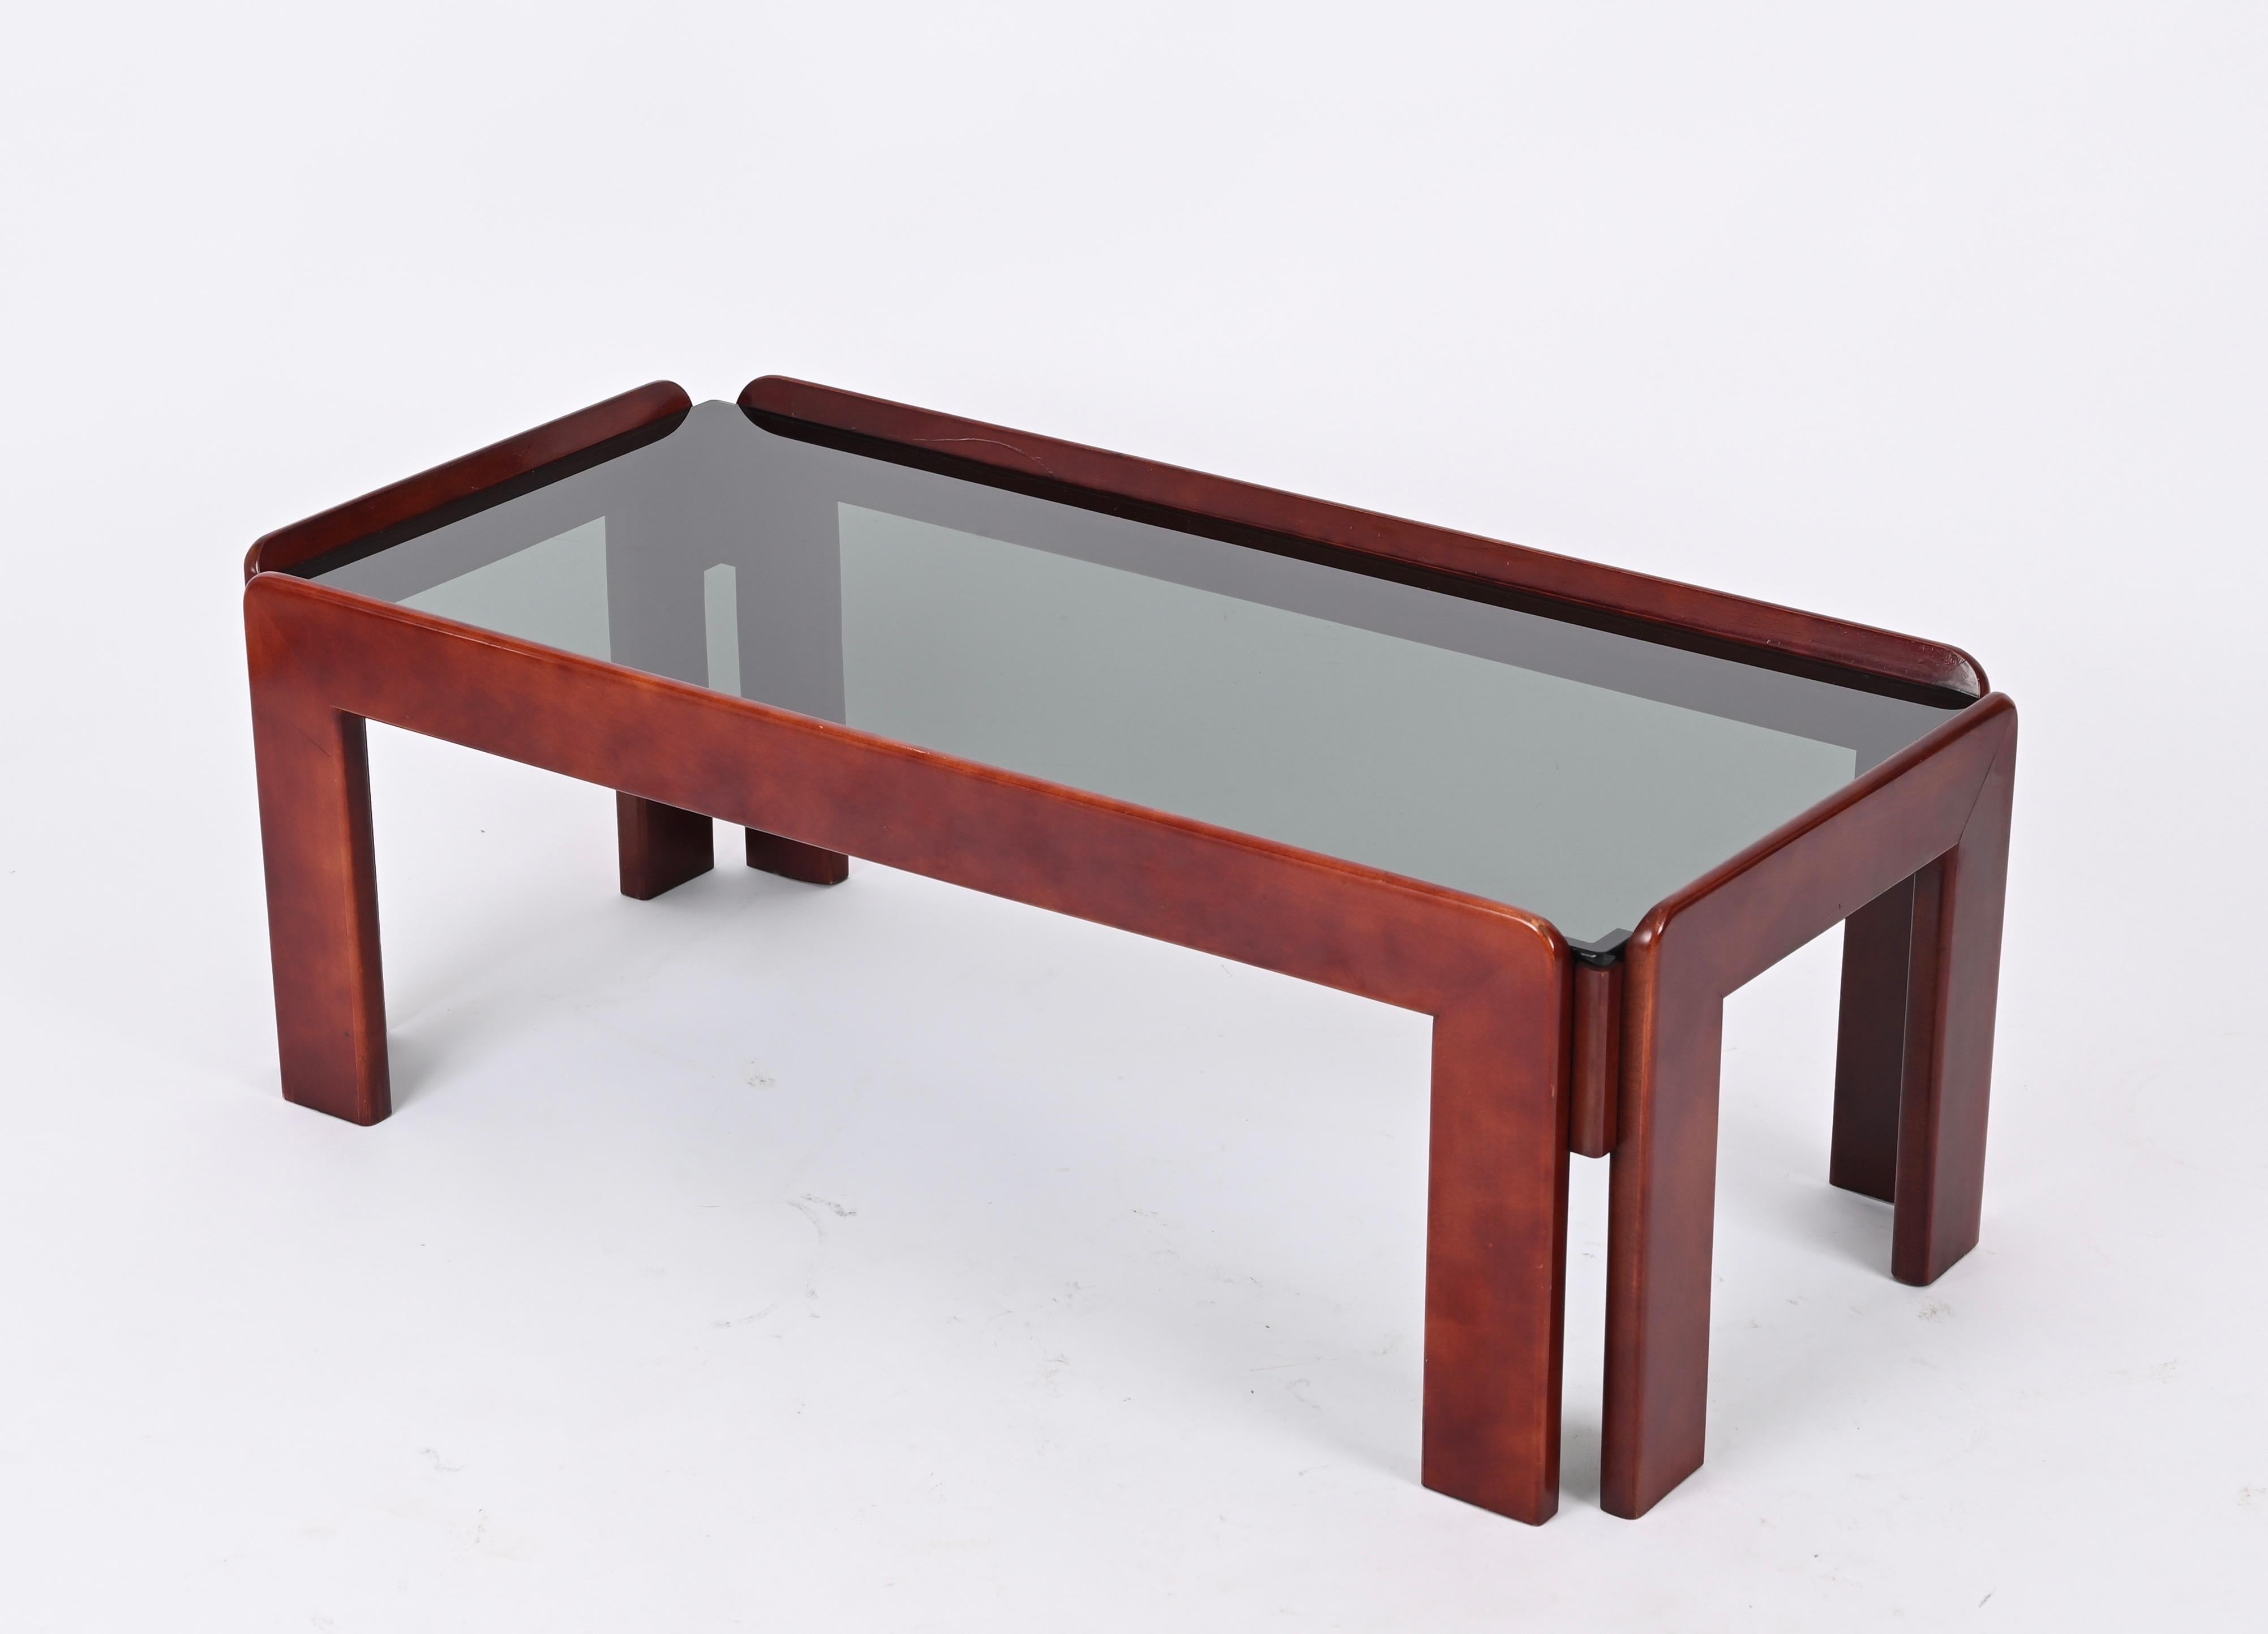 Afra & Tobia Scarpa Mid-Century Walnut Coffee Table for Cassina, Italy 1960s For Sale 1